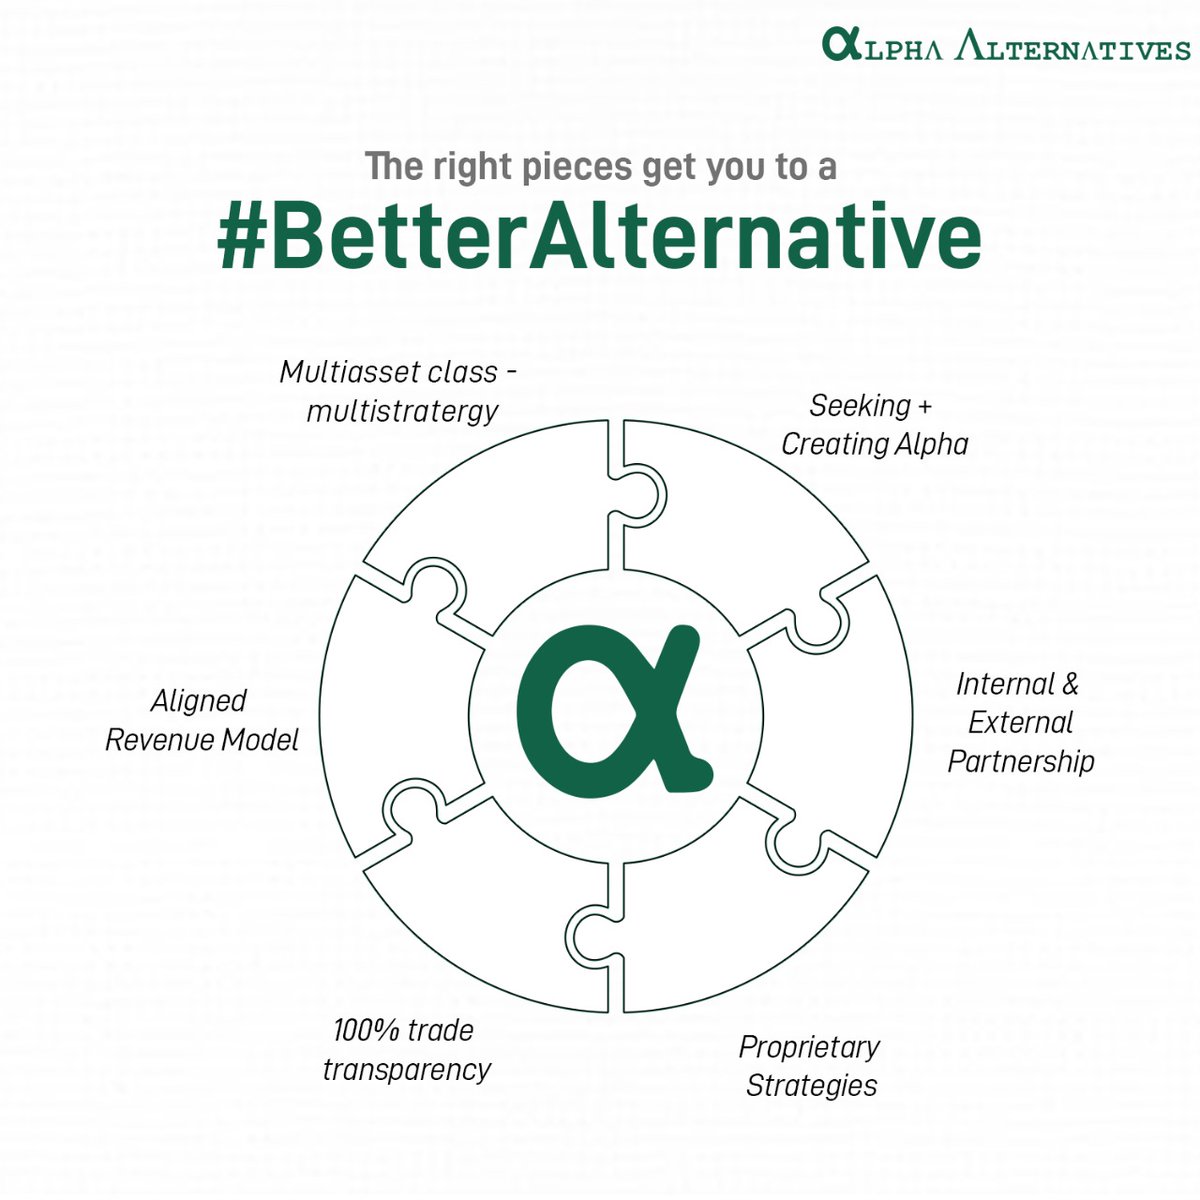 Trying to find the missing pieces to complete your investment and returns puzzle? There is always a #BetterAlternative. Connect with us to complete the big picture!

#reimagineinvesting 
#alpha #partnership #strategy #Trade #Revenue